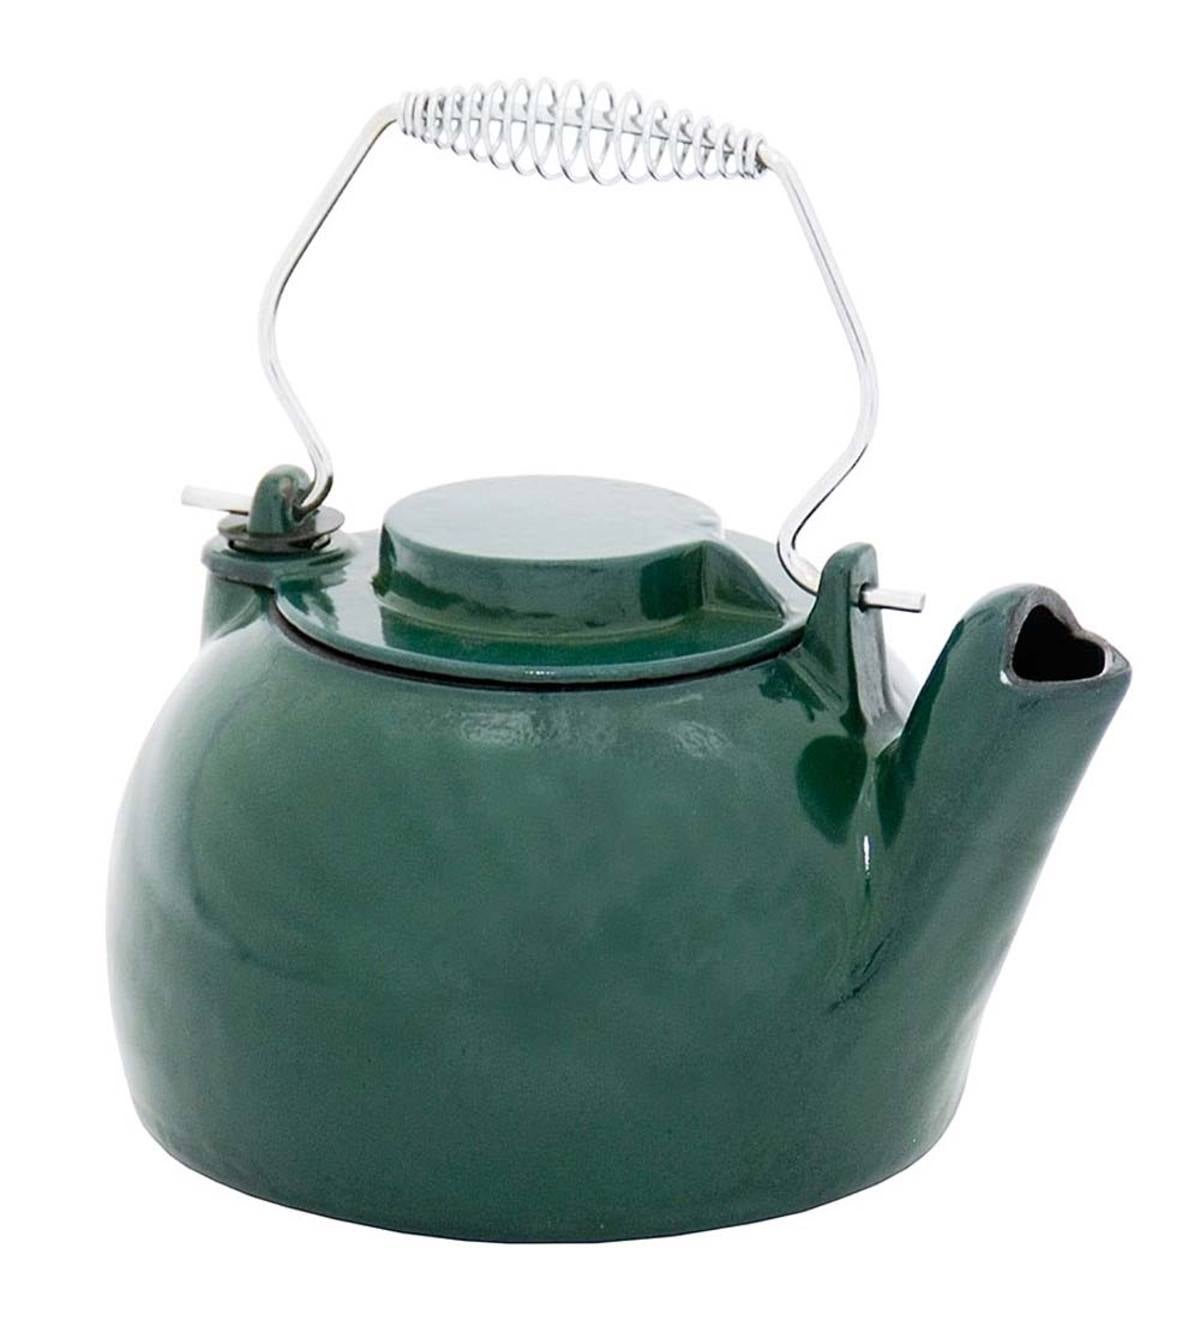 Cast Iron Teapot Green with Silver Accents